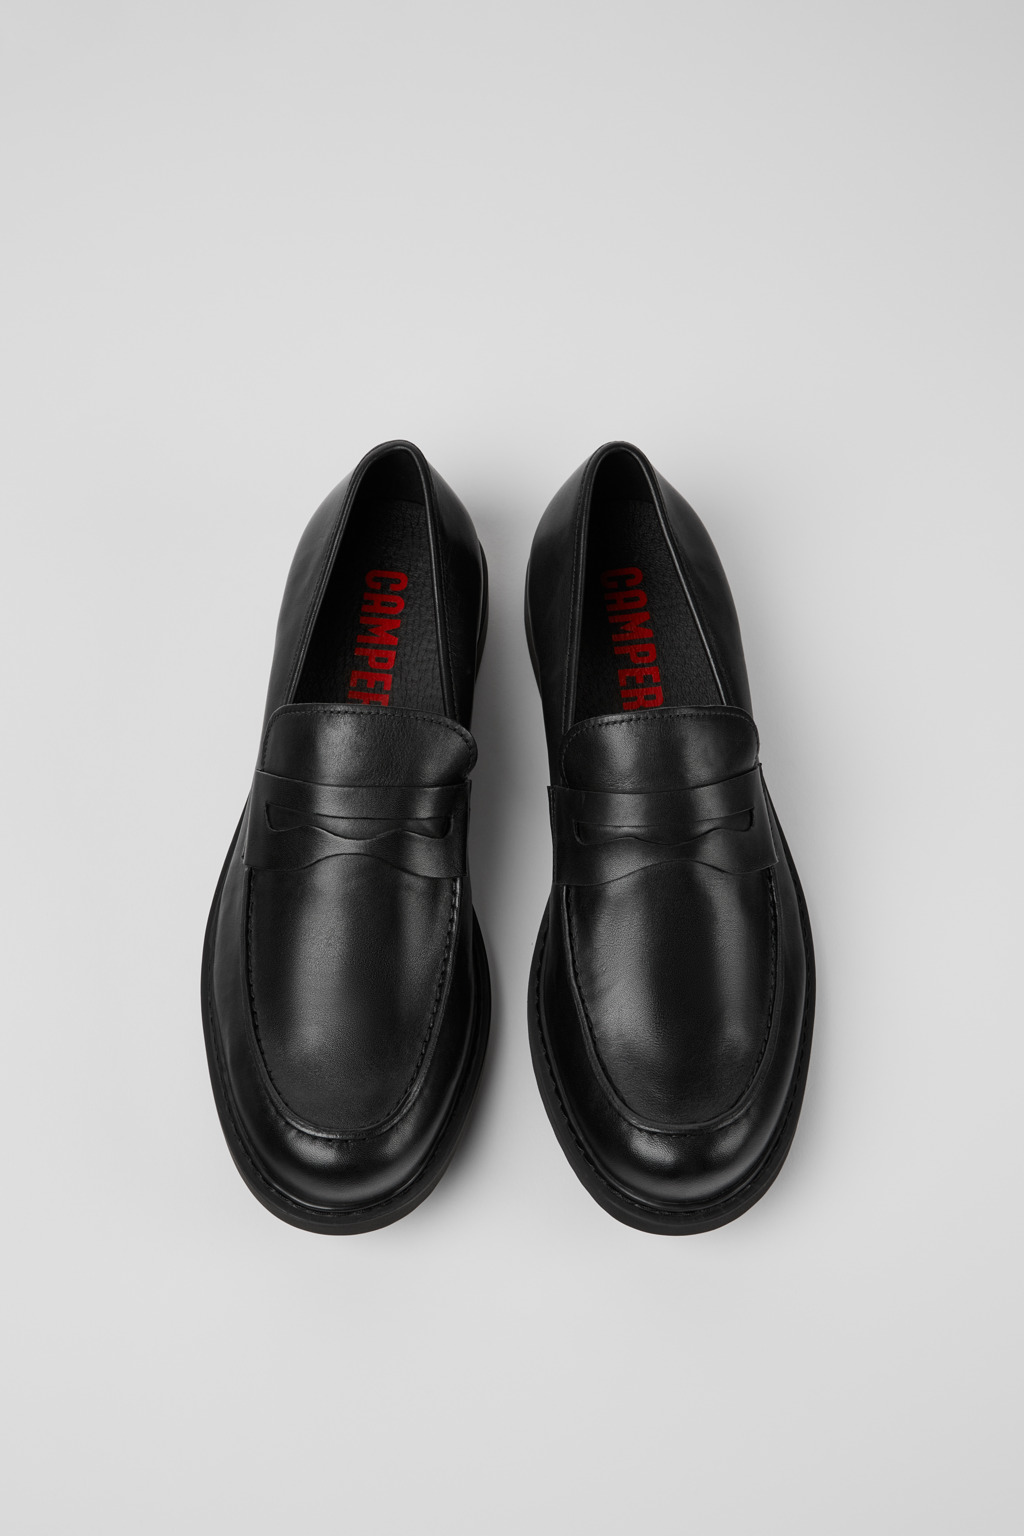 Neuman Black Formal Shoes for Men - Fall/Winter collection 